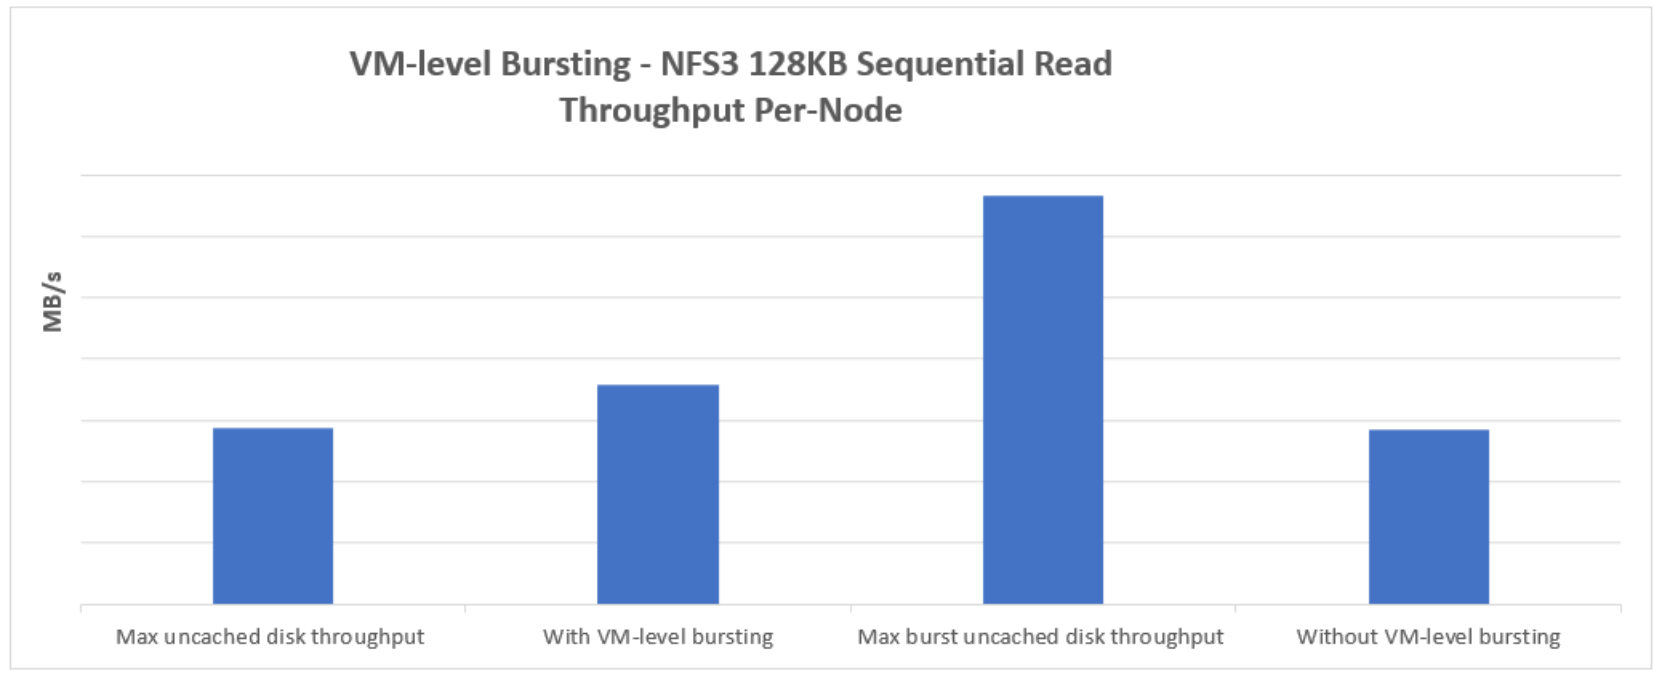 A figure of sequential read performance for with and without VM-level bursting, comparing them with max uncached disk throughput and max burst uncached disk throughput